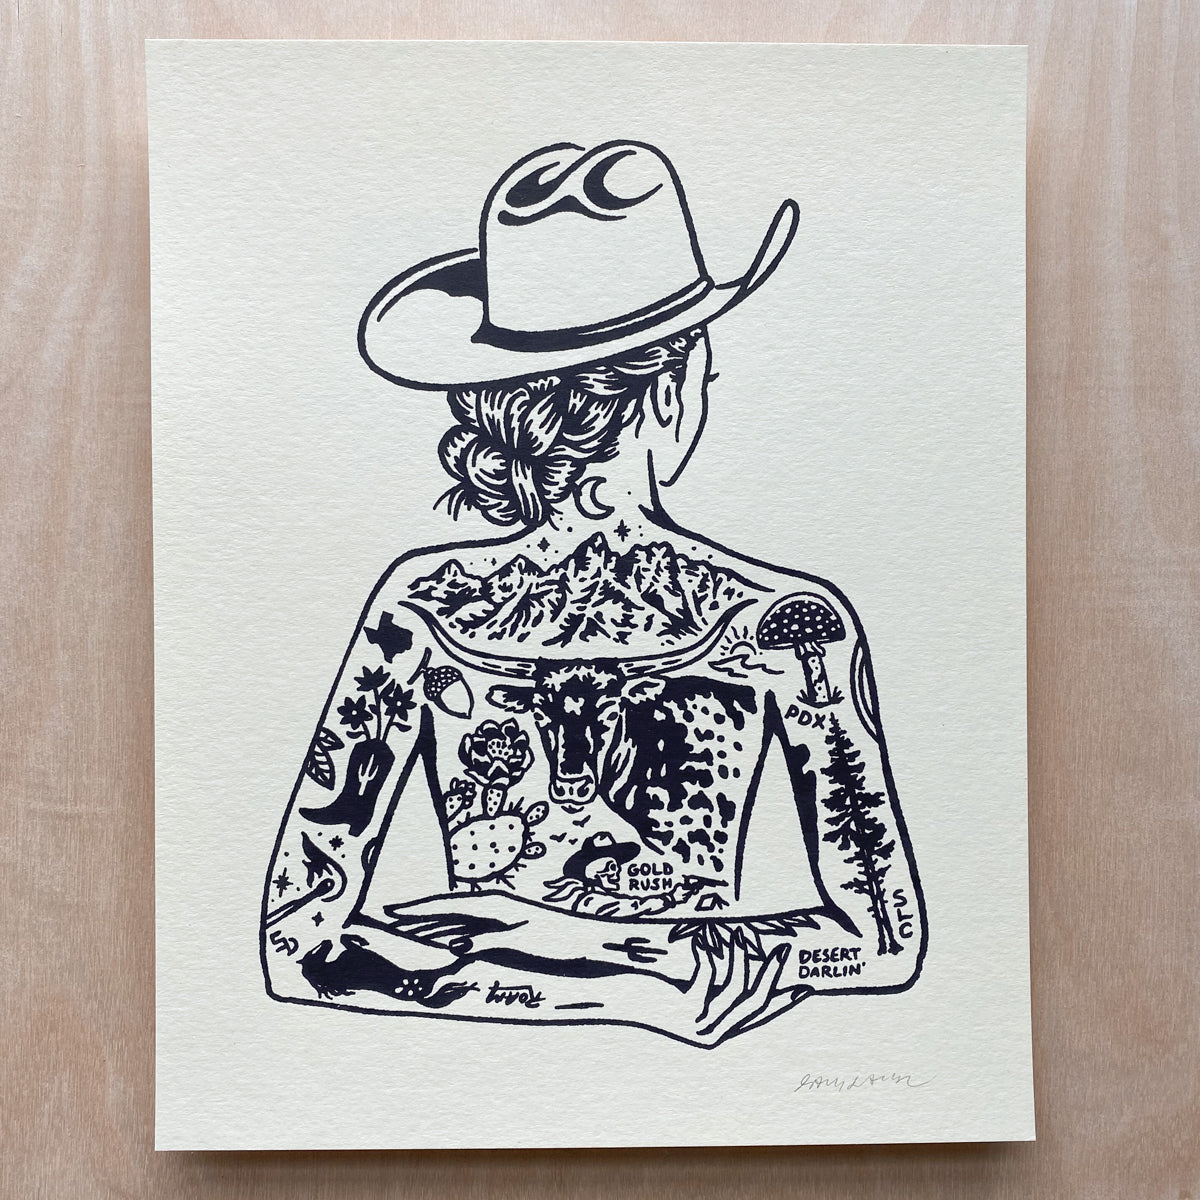 Tattooed Cowgirl 1 - Signed 8x10in Print #325